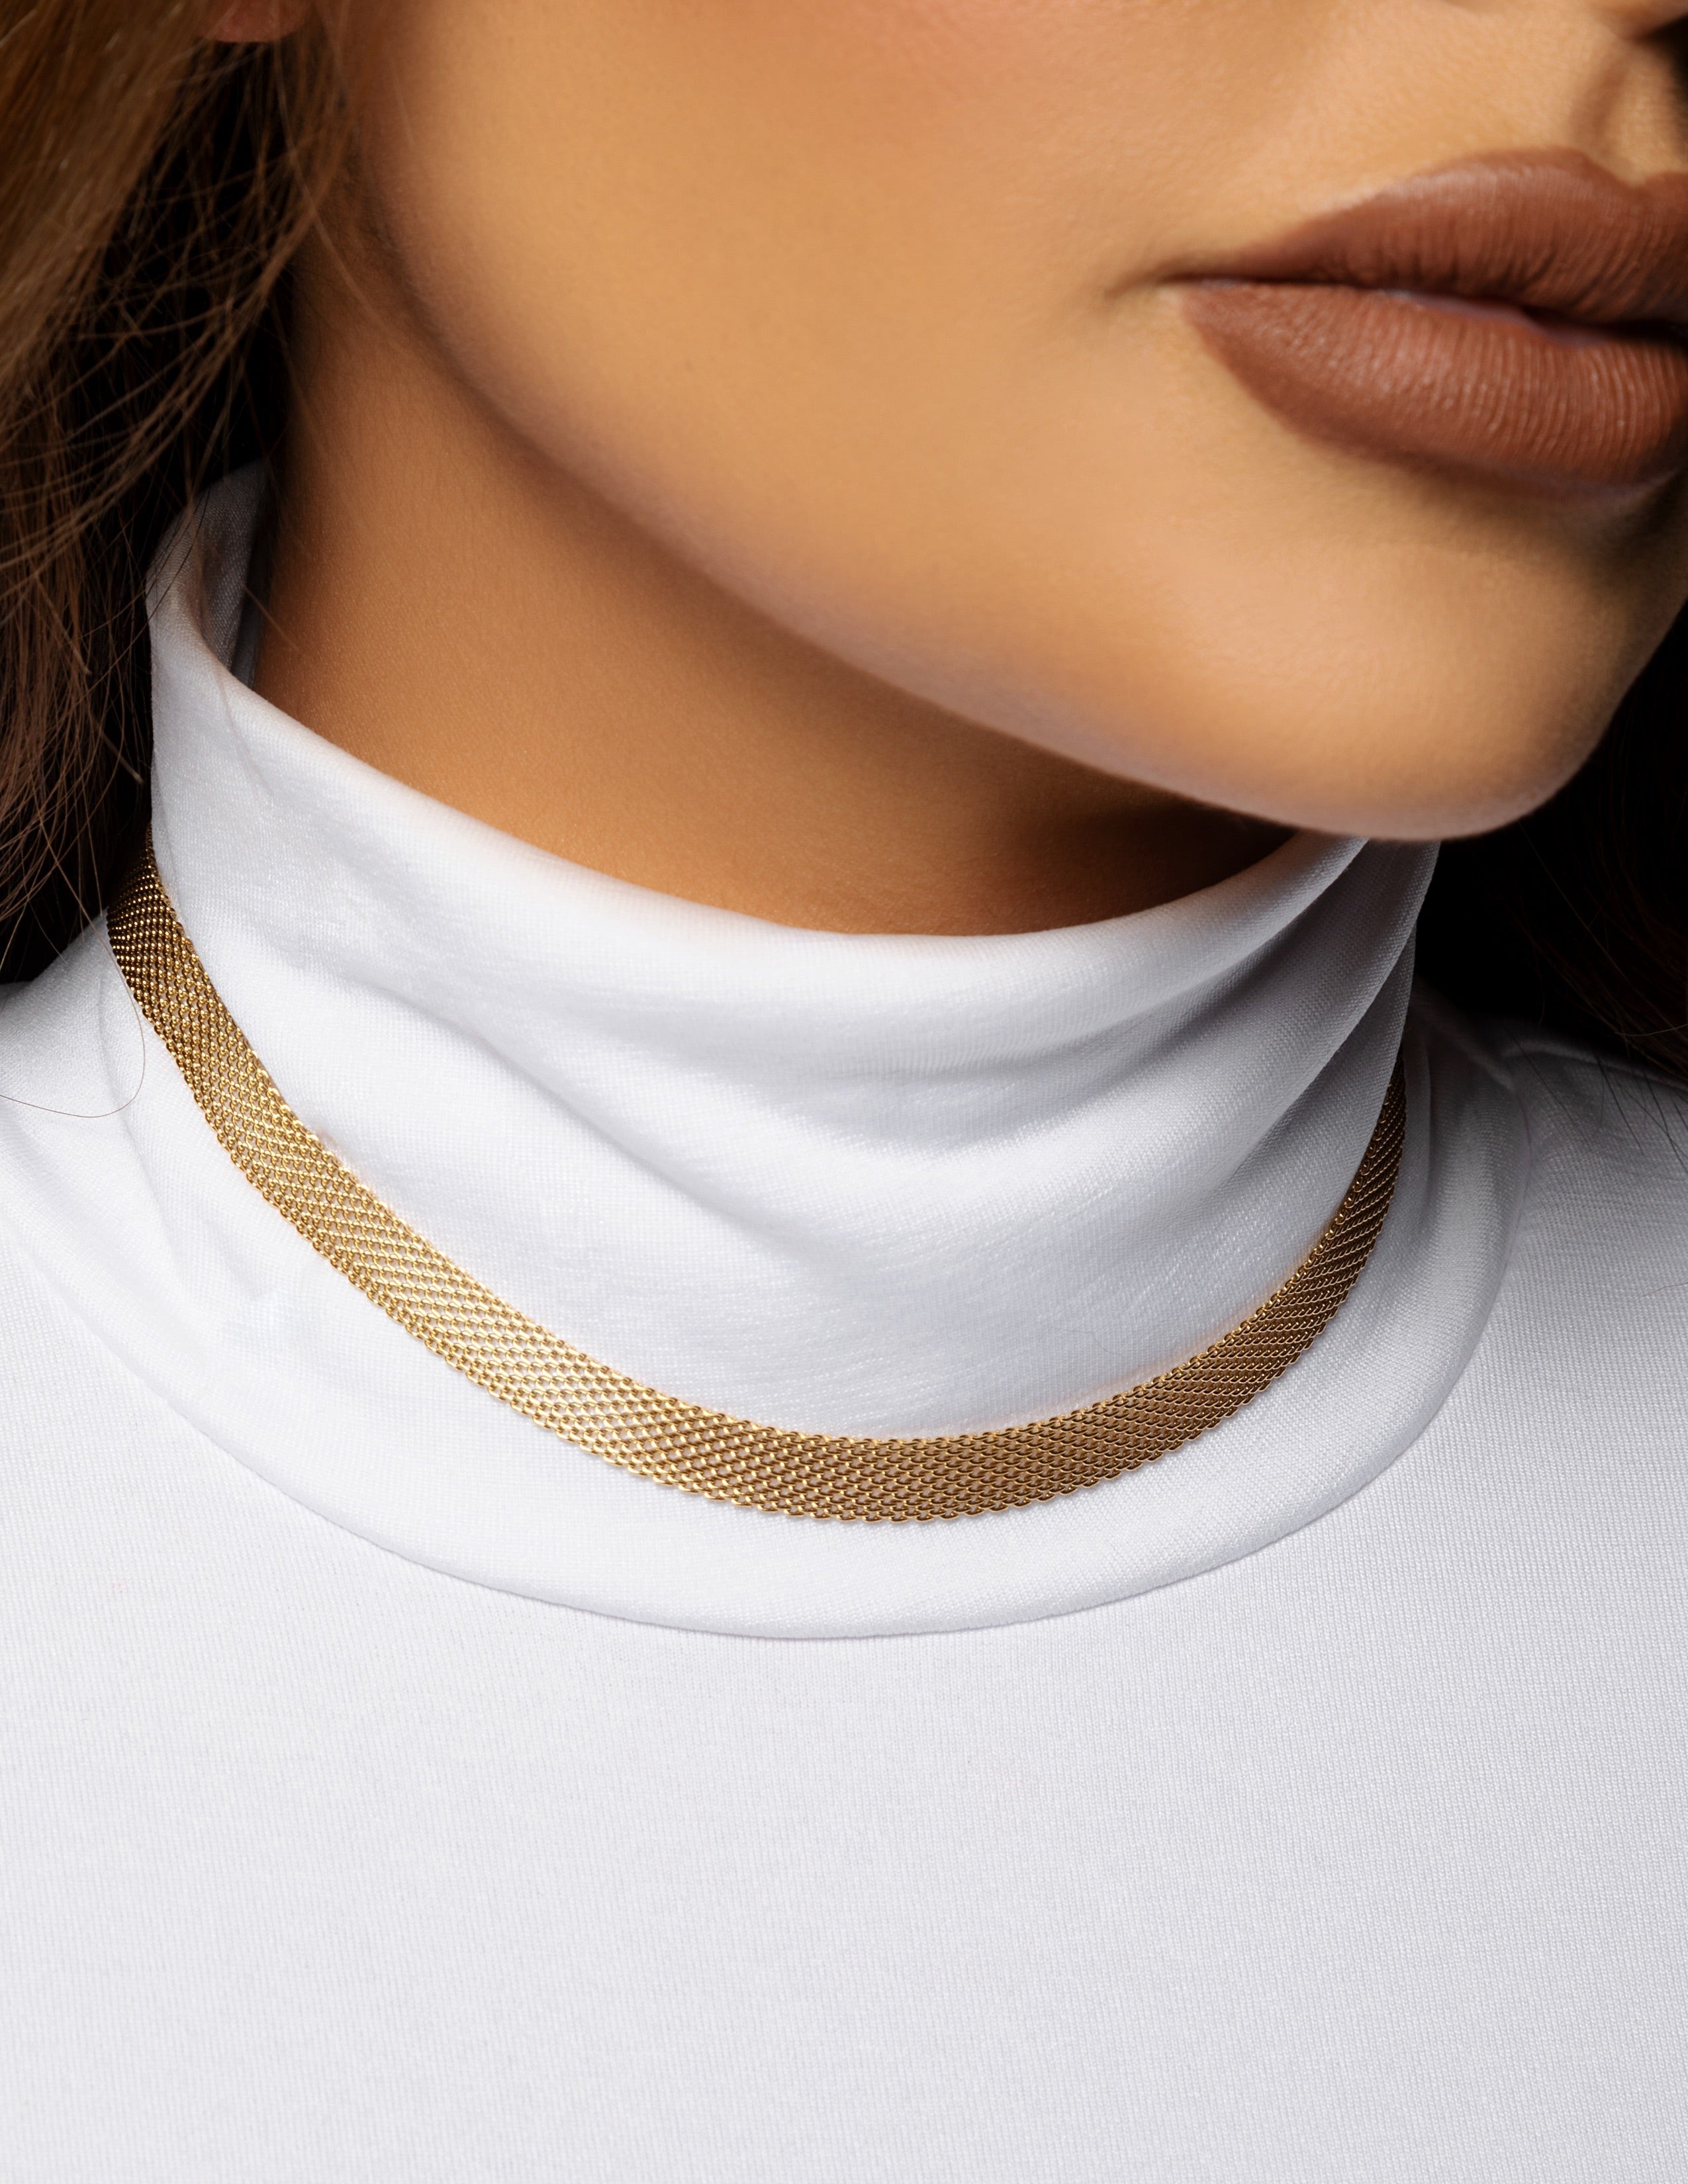 18k Gold Plated Mesh Chain Necklace